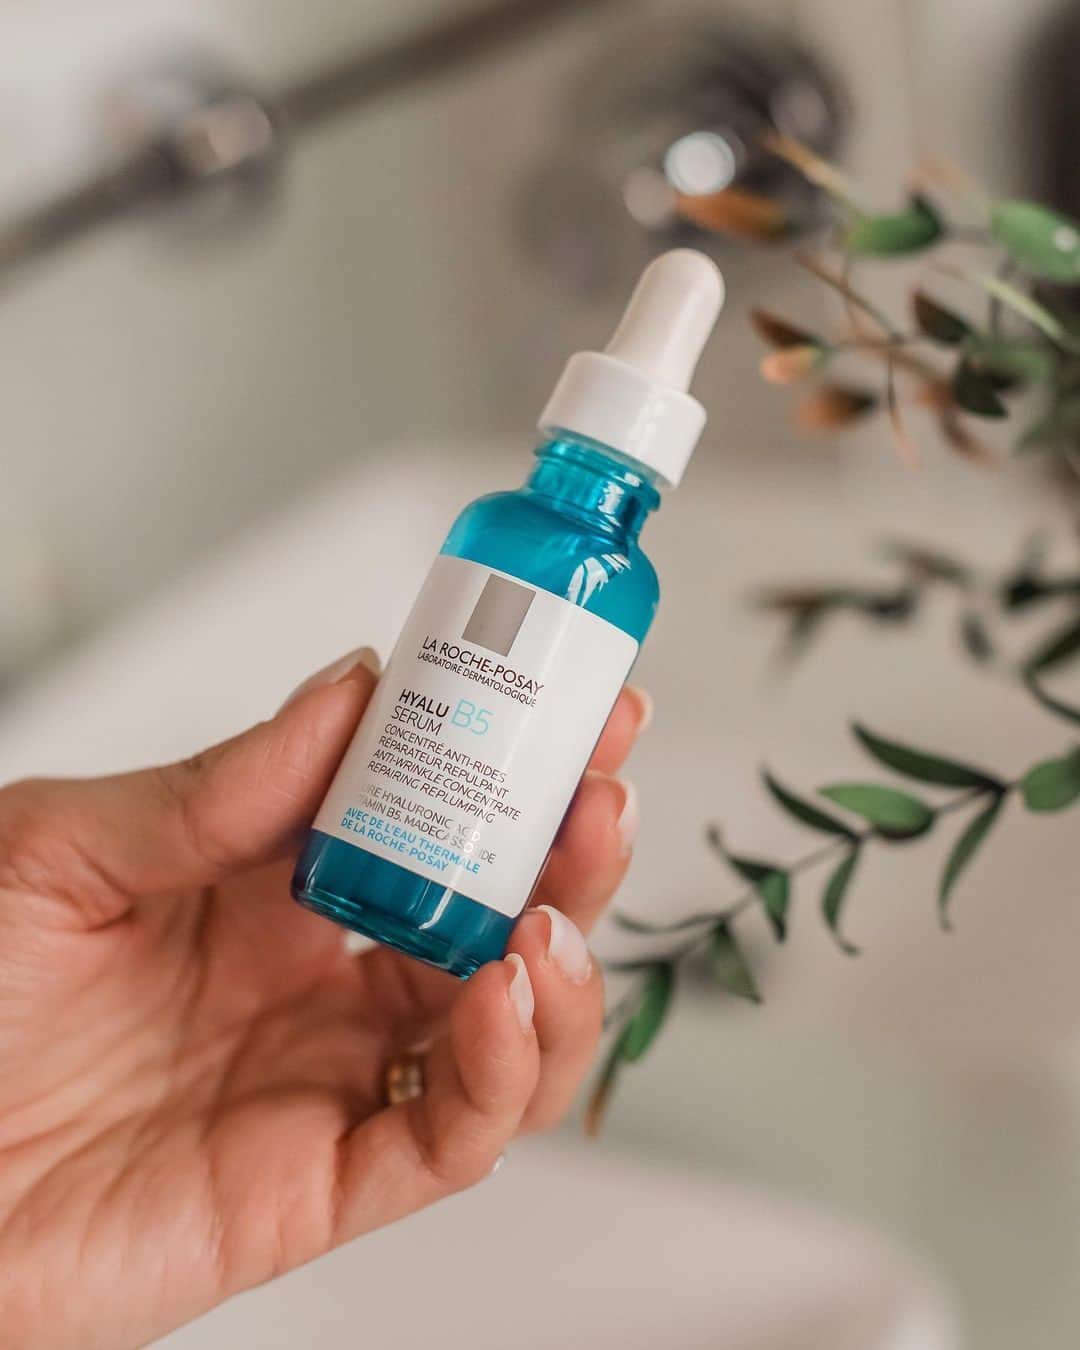 La Roche-Posayのインスタグラム：「The secret behind @martacyrnecarvalho's clients fresh & replumped skin? You guessed it: our Hyalu B5 serum! As a must-have for your anti-ageing toolkit, this serum helps to... ✨ Reduce the appearance of fine lines and wrinkles. 🧬 Improve elasticity and firmness. 💧 Hydrate and deeply replenish skin.  Have you tried our Hyalu B5 serum? Let us know your thoughts below 👇  All languages spoken here! Feel free to talk to us at anytime.  #larocheposay #hyaluB5 #serum #antiageing #sensitiveskin Global official page from La Roche-Posay, France.」